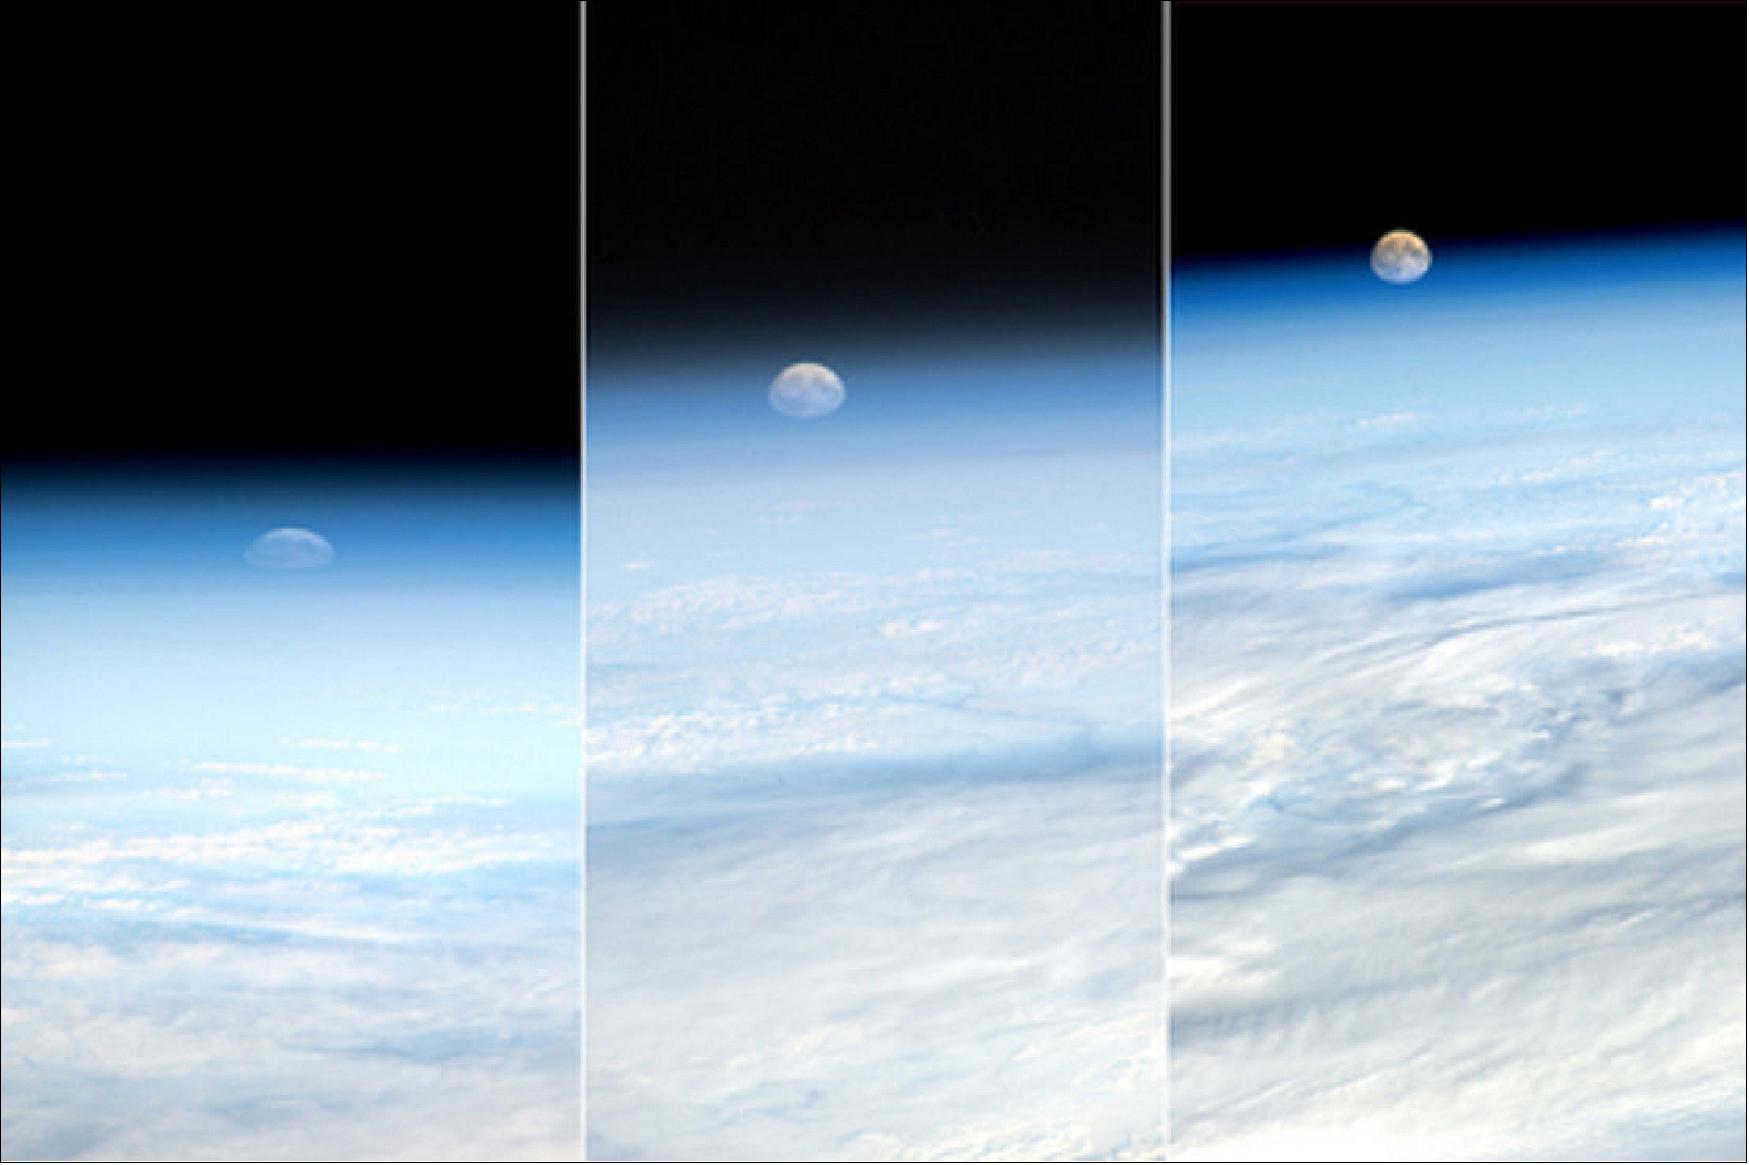 Figure 11: Moonrise as seen from the ISS. A sequence of photographs captured by ESA astronaut Paolo Nespoli, during his MagISStra mission in 2011 (image credit: ESA/NASA)